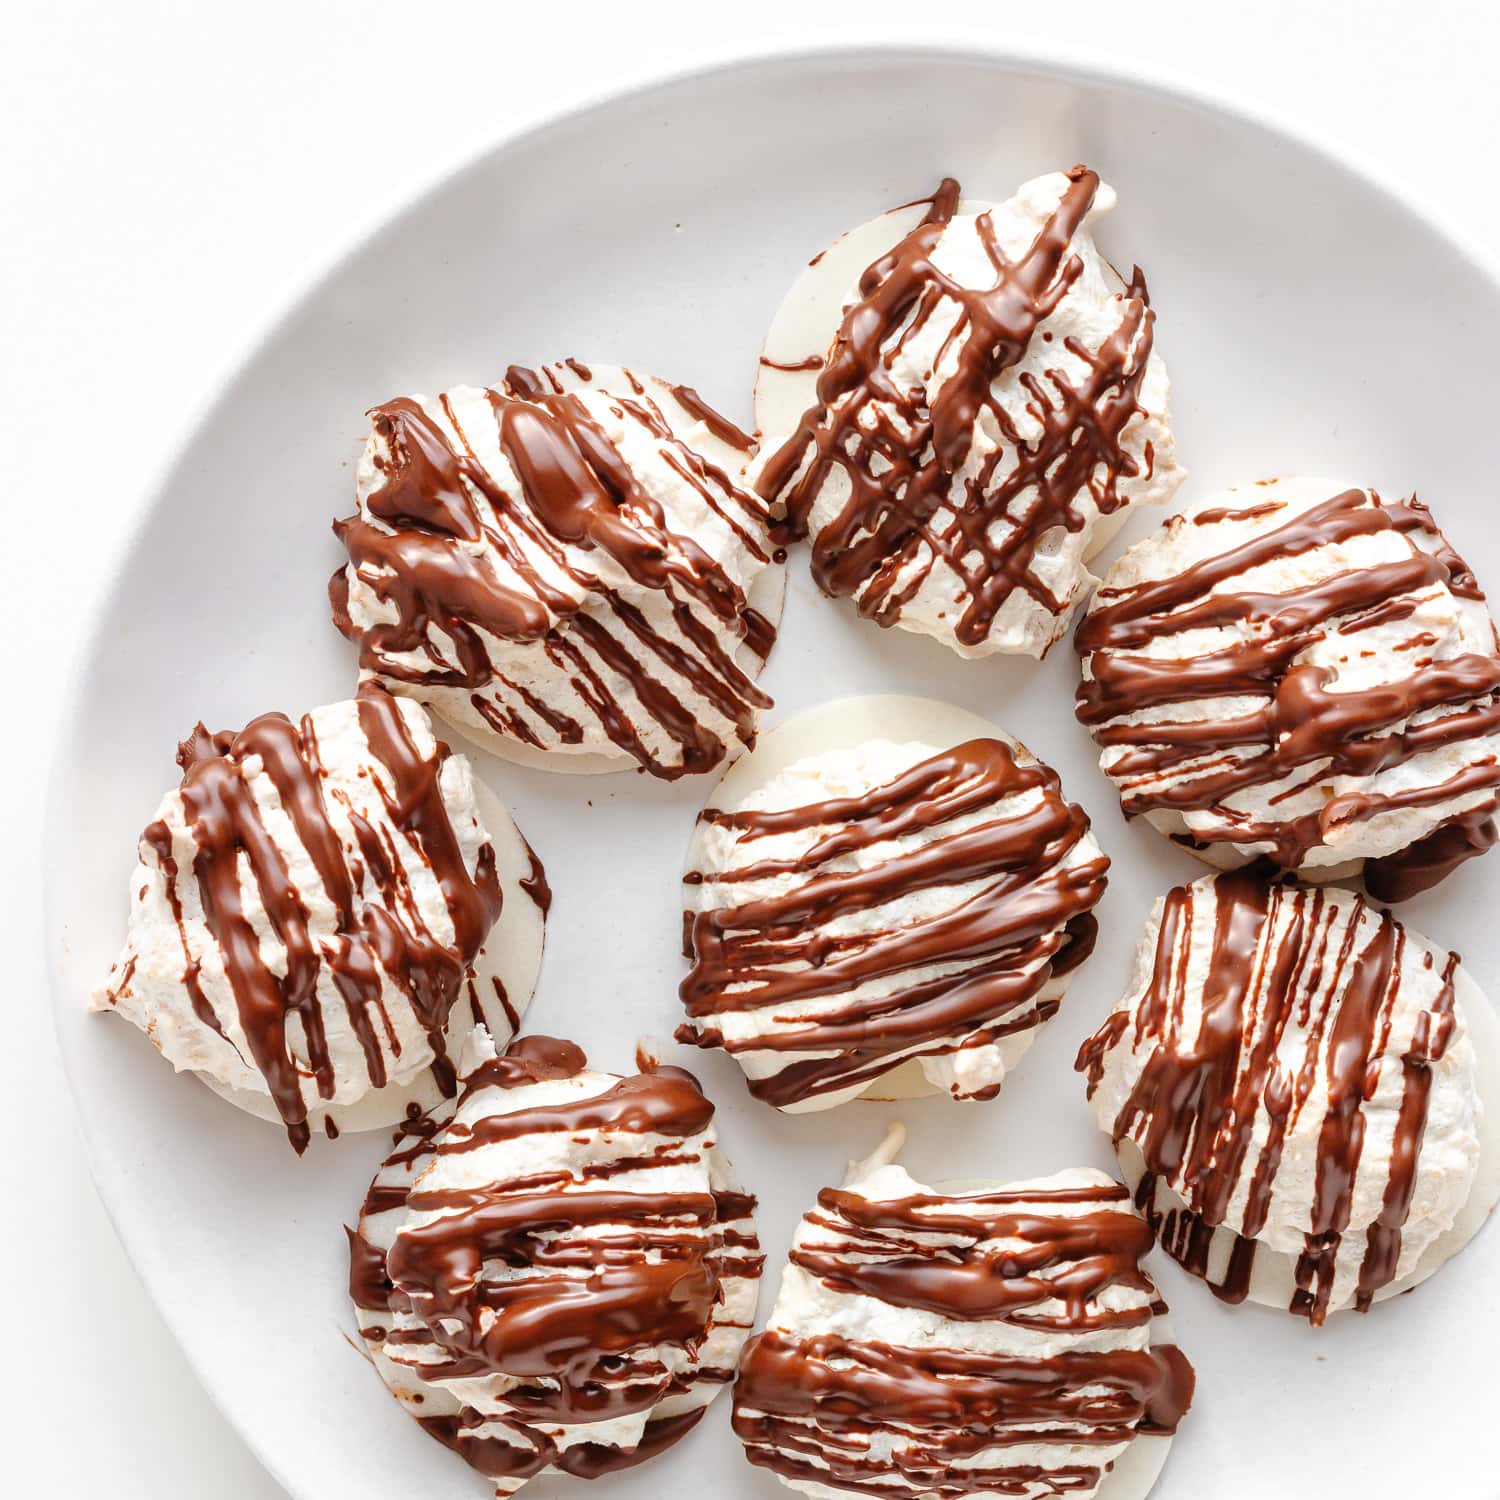 Chocolate drizzled coconut macaroons on a white plate.